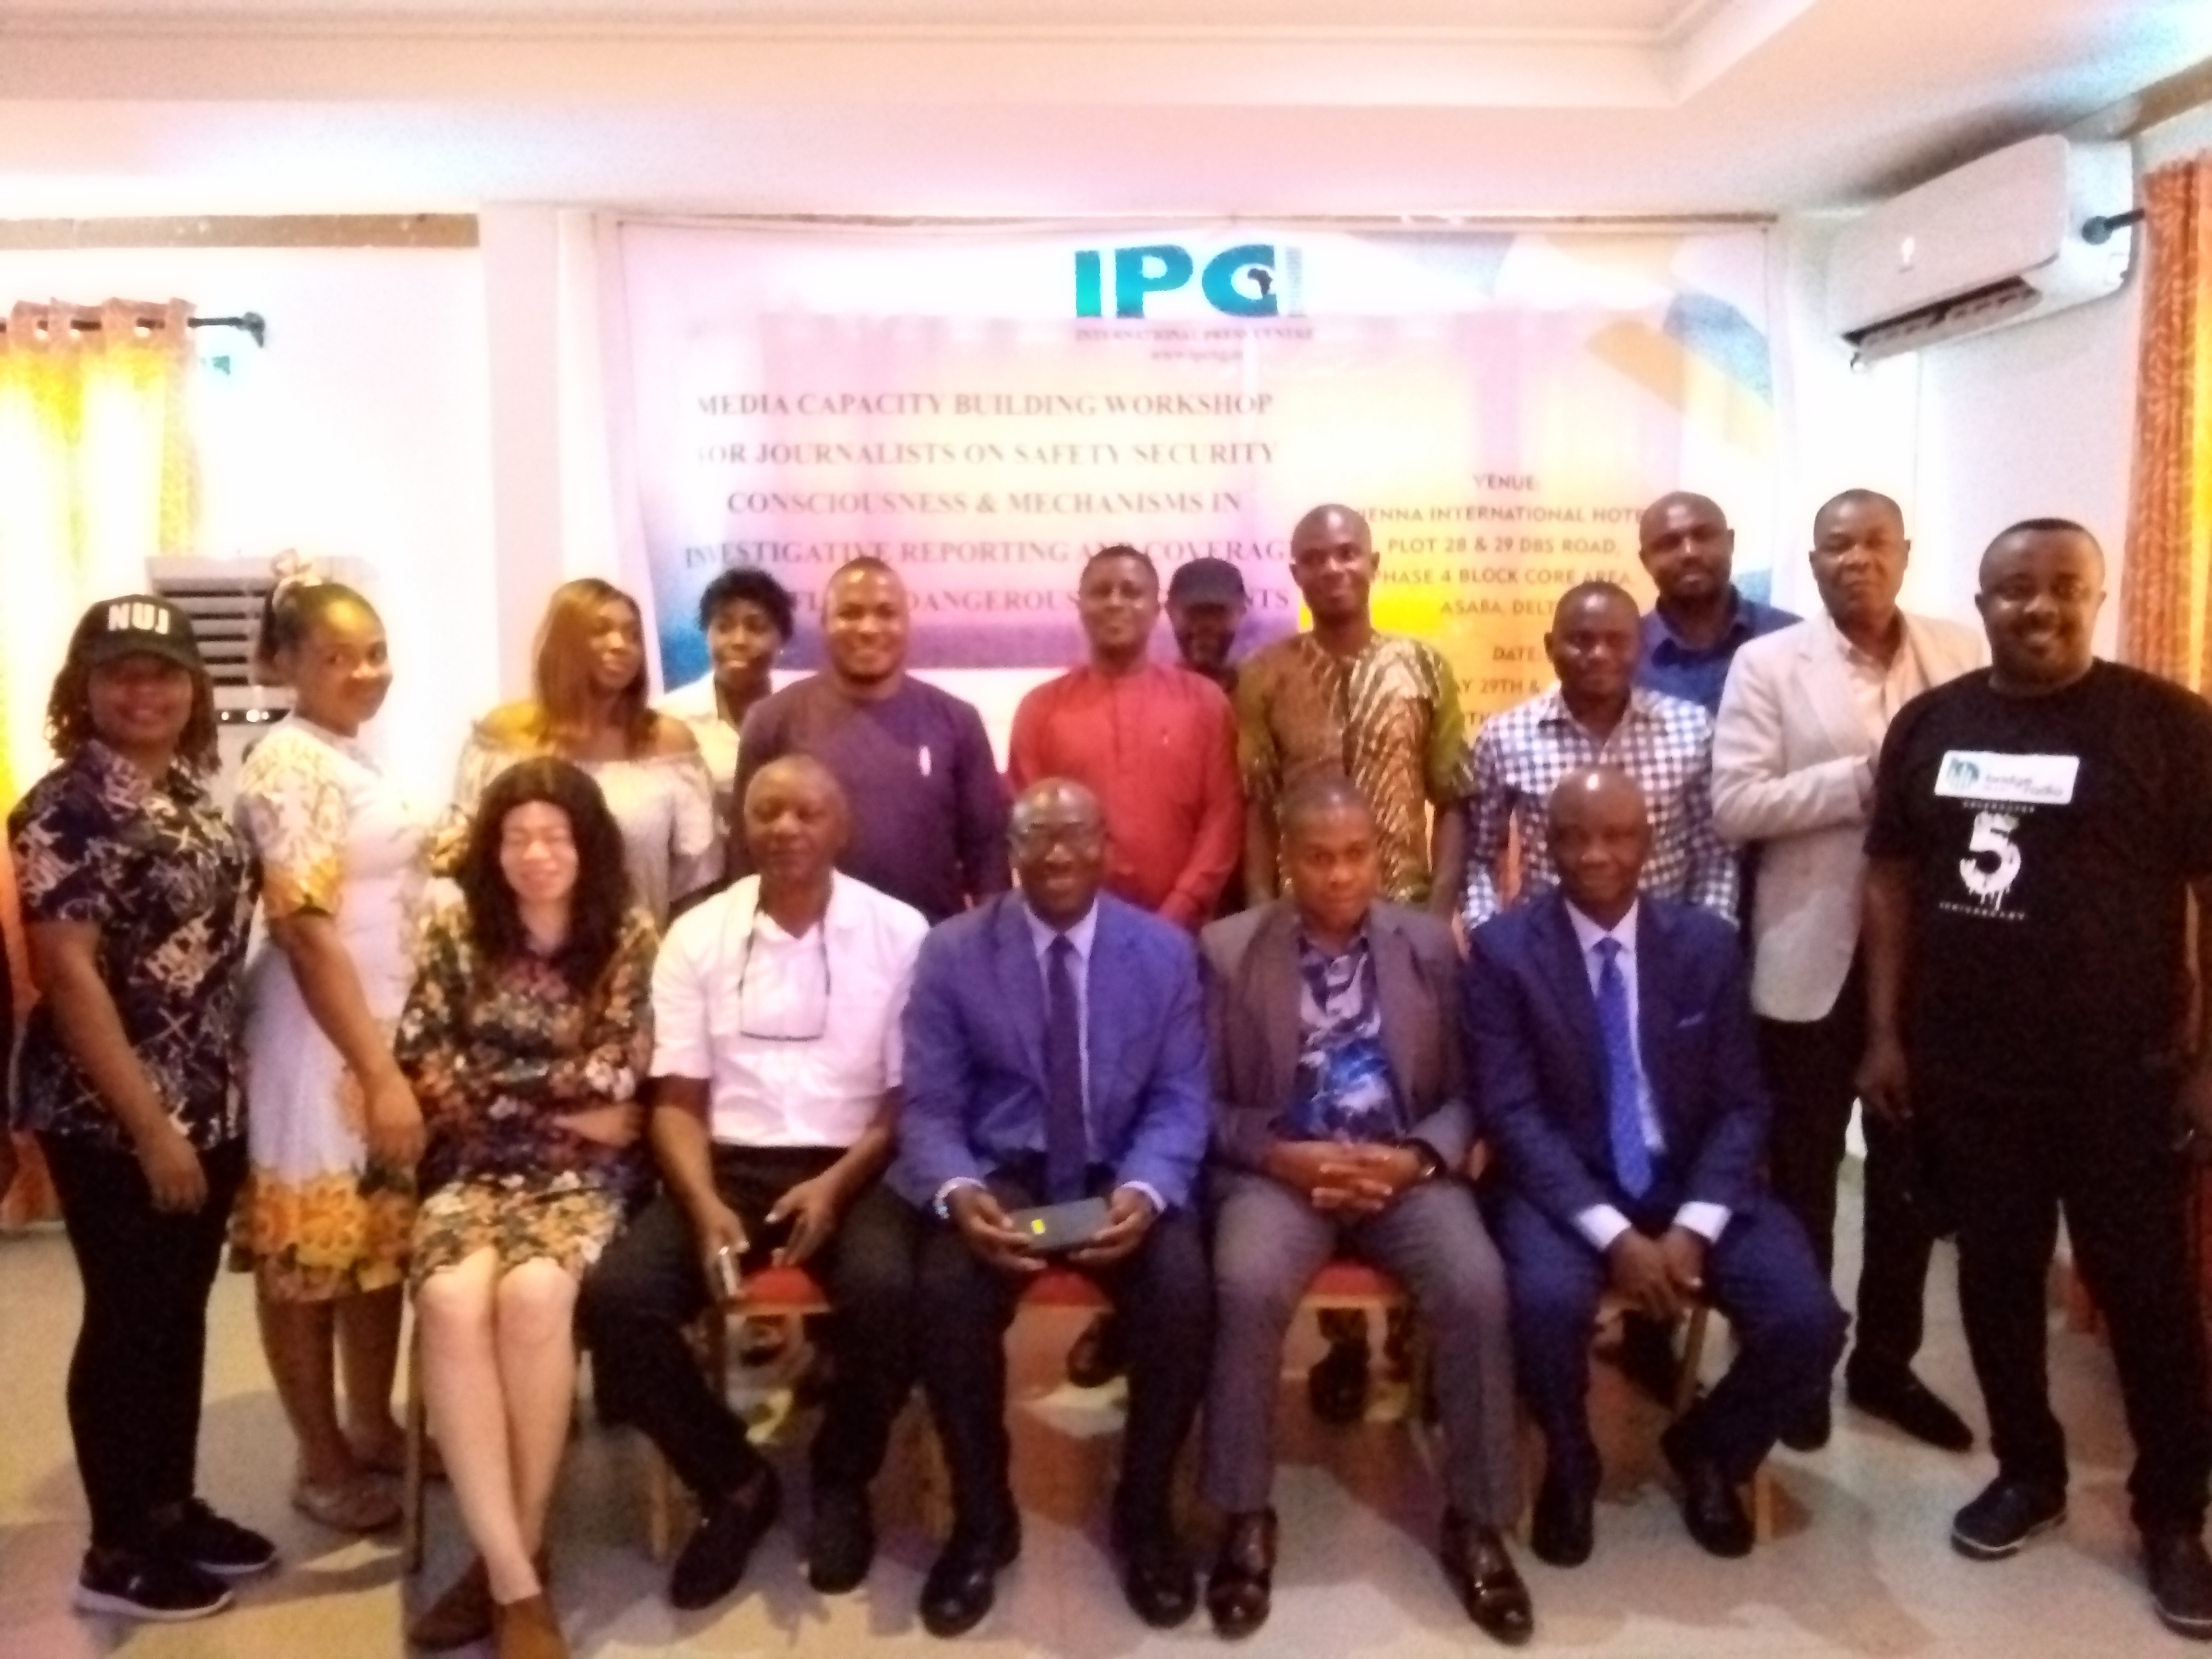 IPC’s workshop for journalists on safety, security kicks off in Asaba